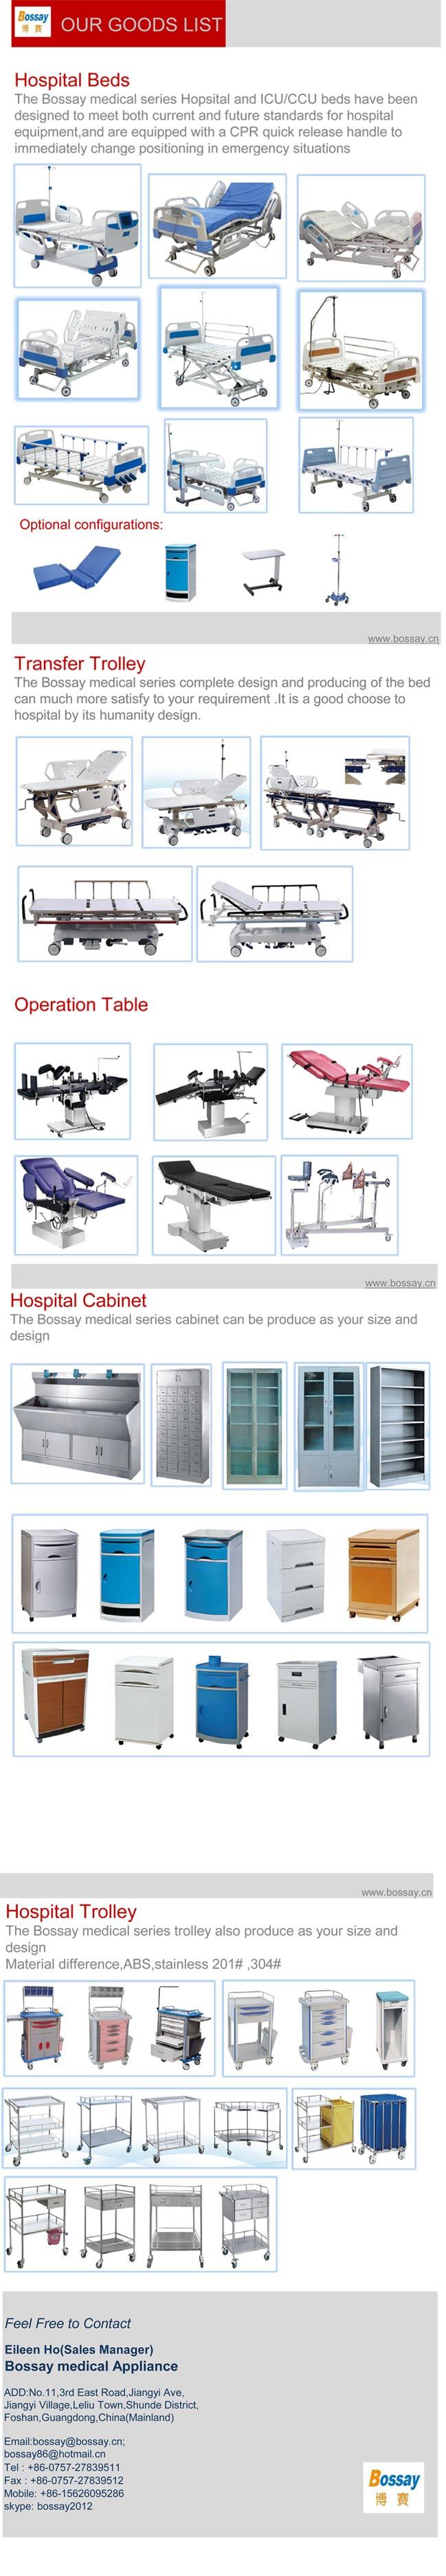 Manual 1 Crank Hospital Beds Simple Beds for Patient (BS-816)